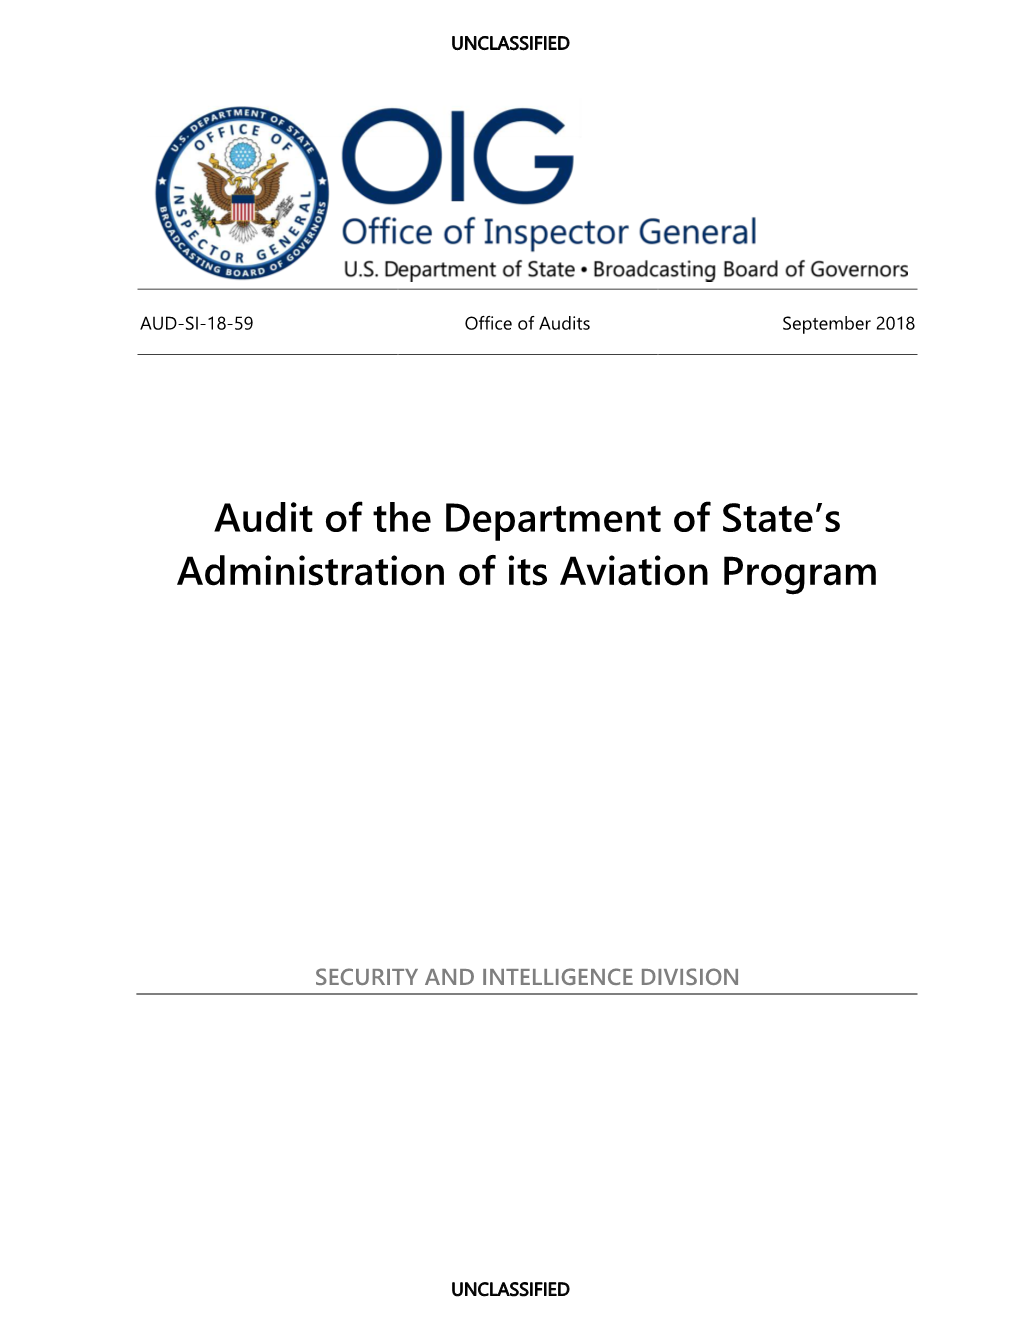 Audit of the Department of State's Administration of Its Aviation